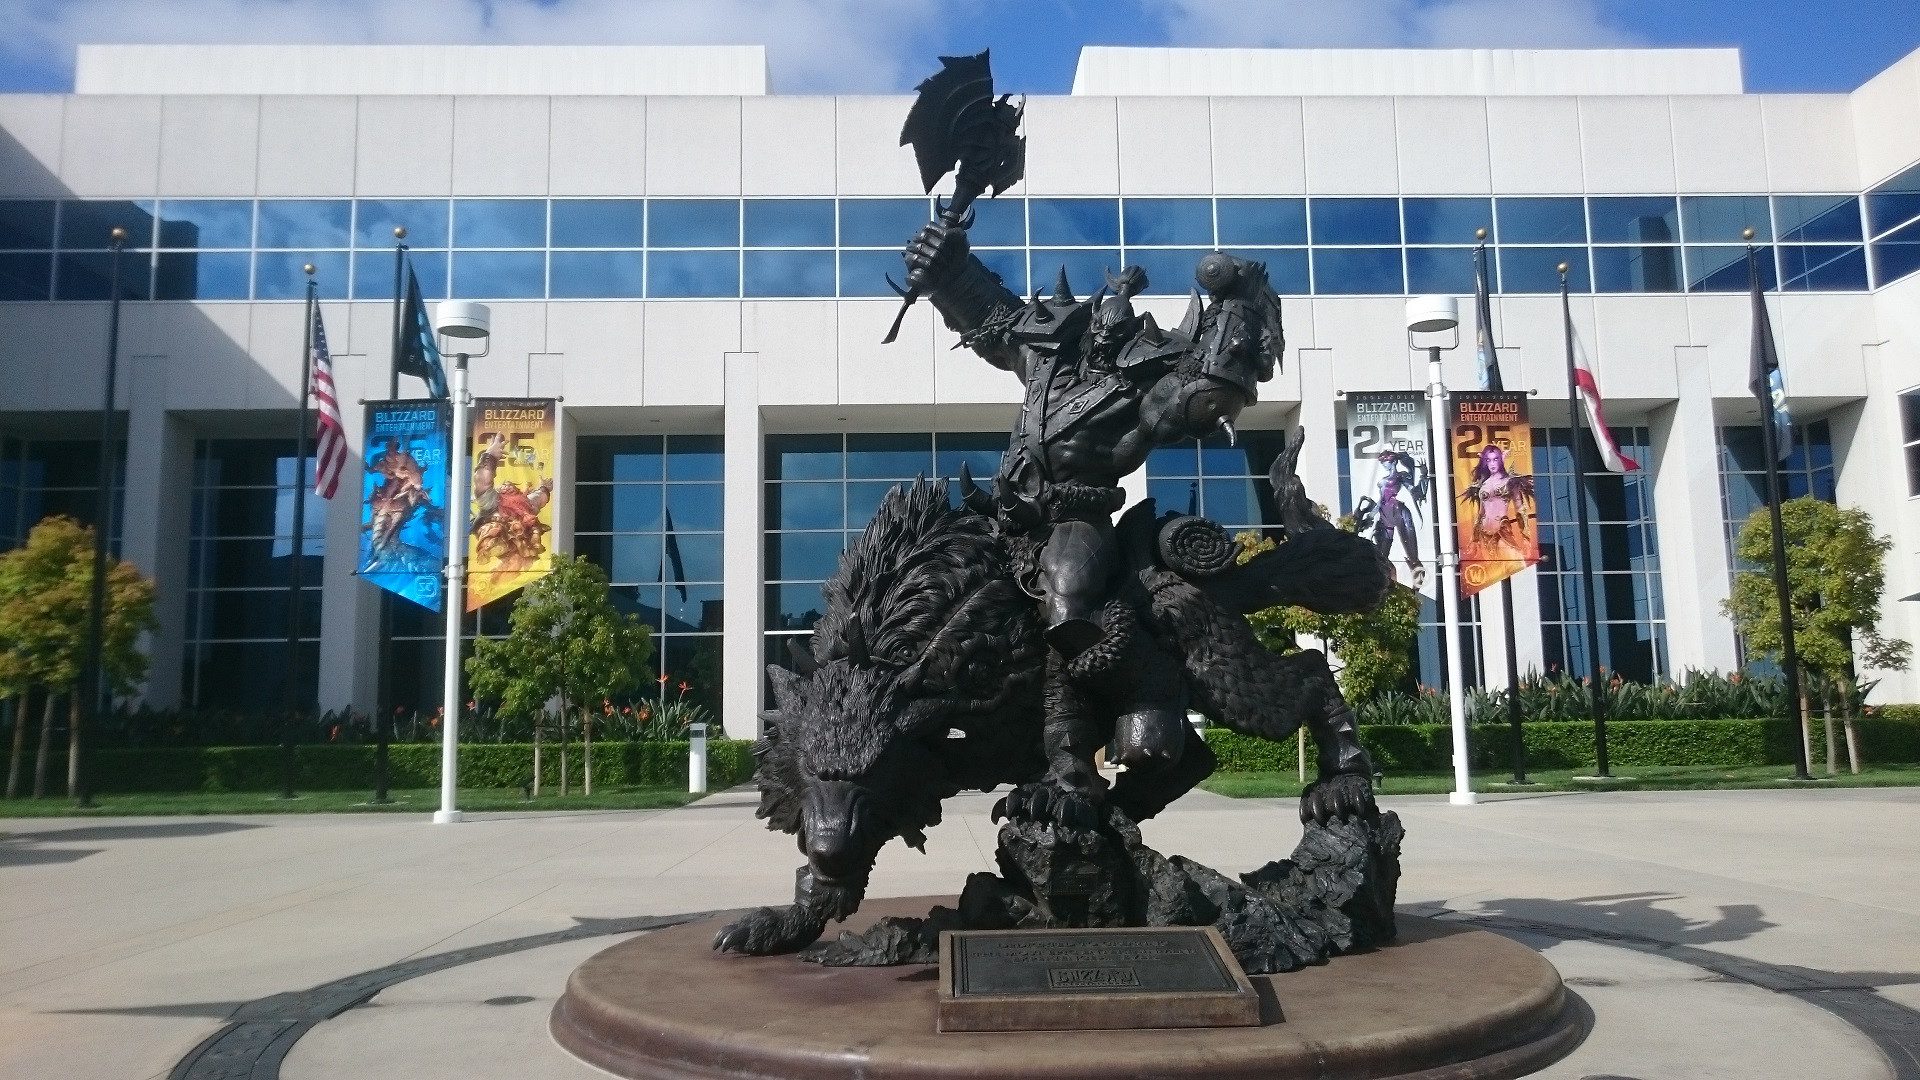 The Orc statue off Blizzard's campus in Irvine